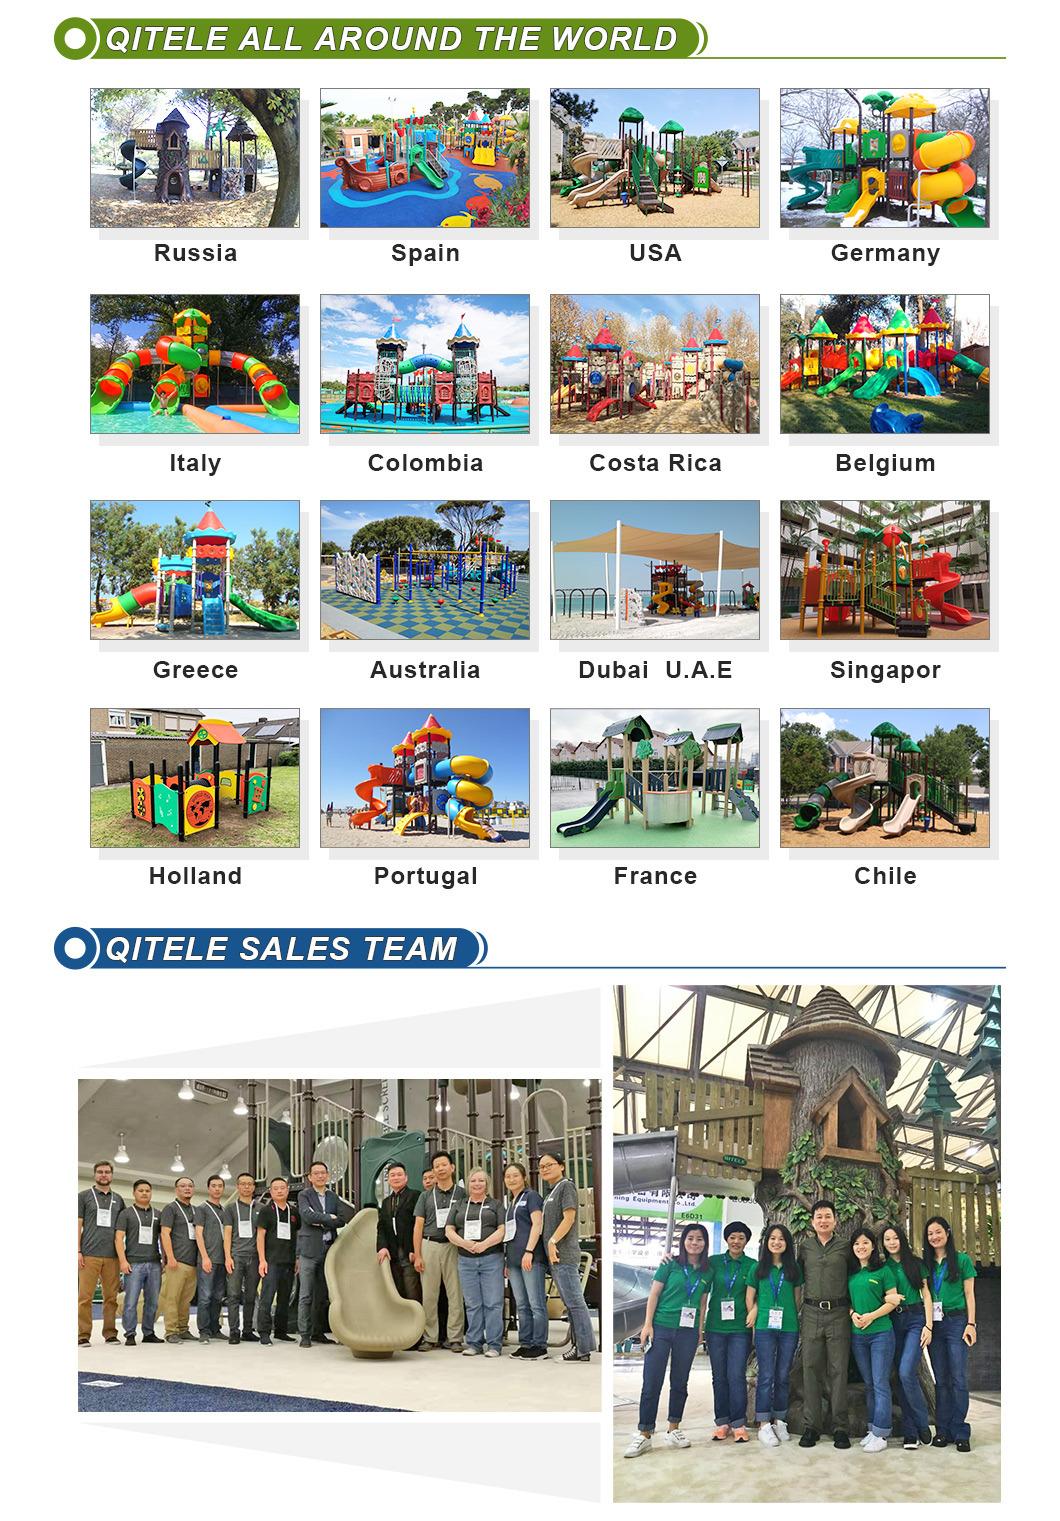 Outdoor Playground Equipment Special Design From Customer